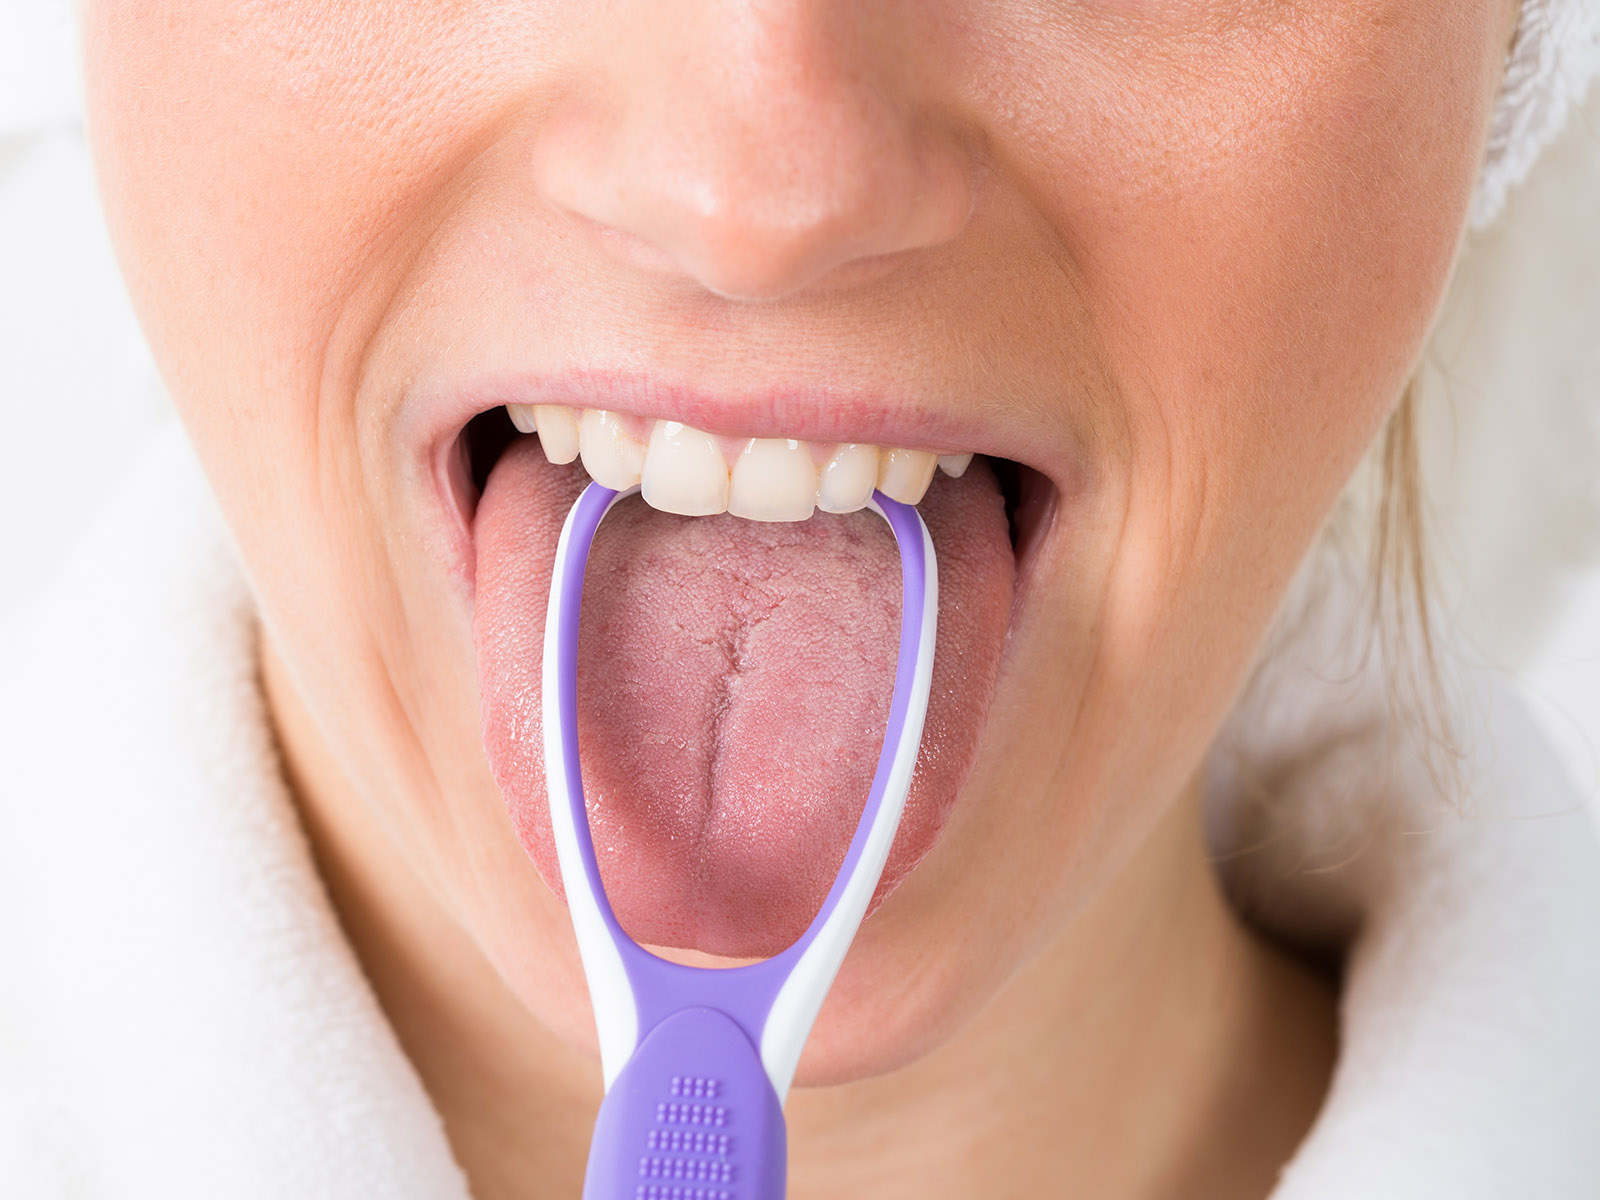 Do You Use A Tongue Scraper Before or After Brushing?